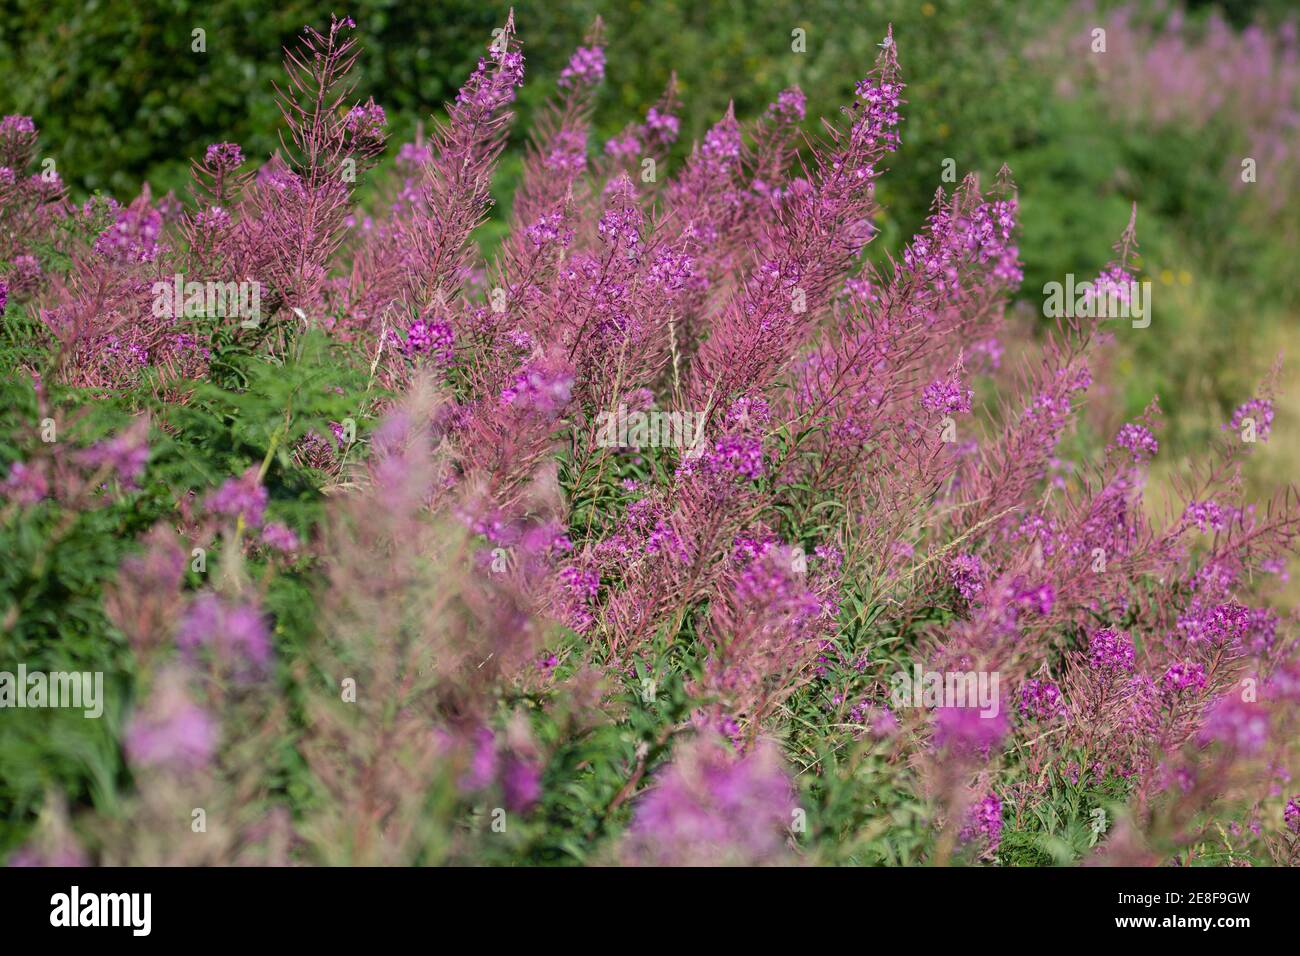 a large clump of Rosebay willow herb (Chamerion angustifolium) Stock Photo